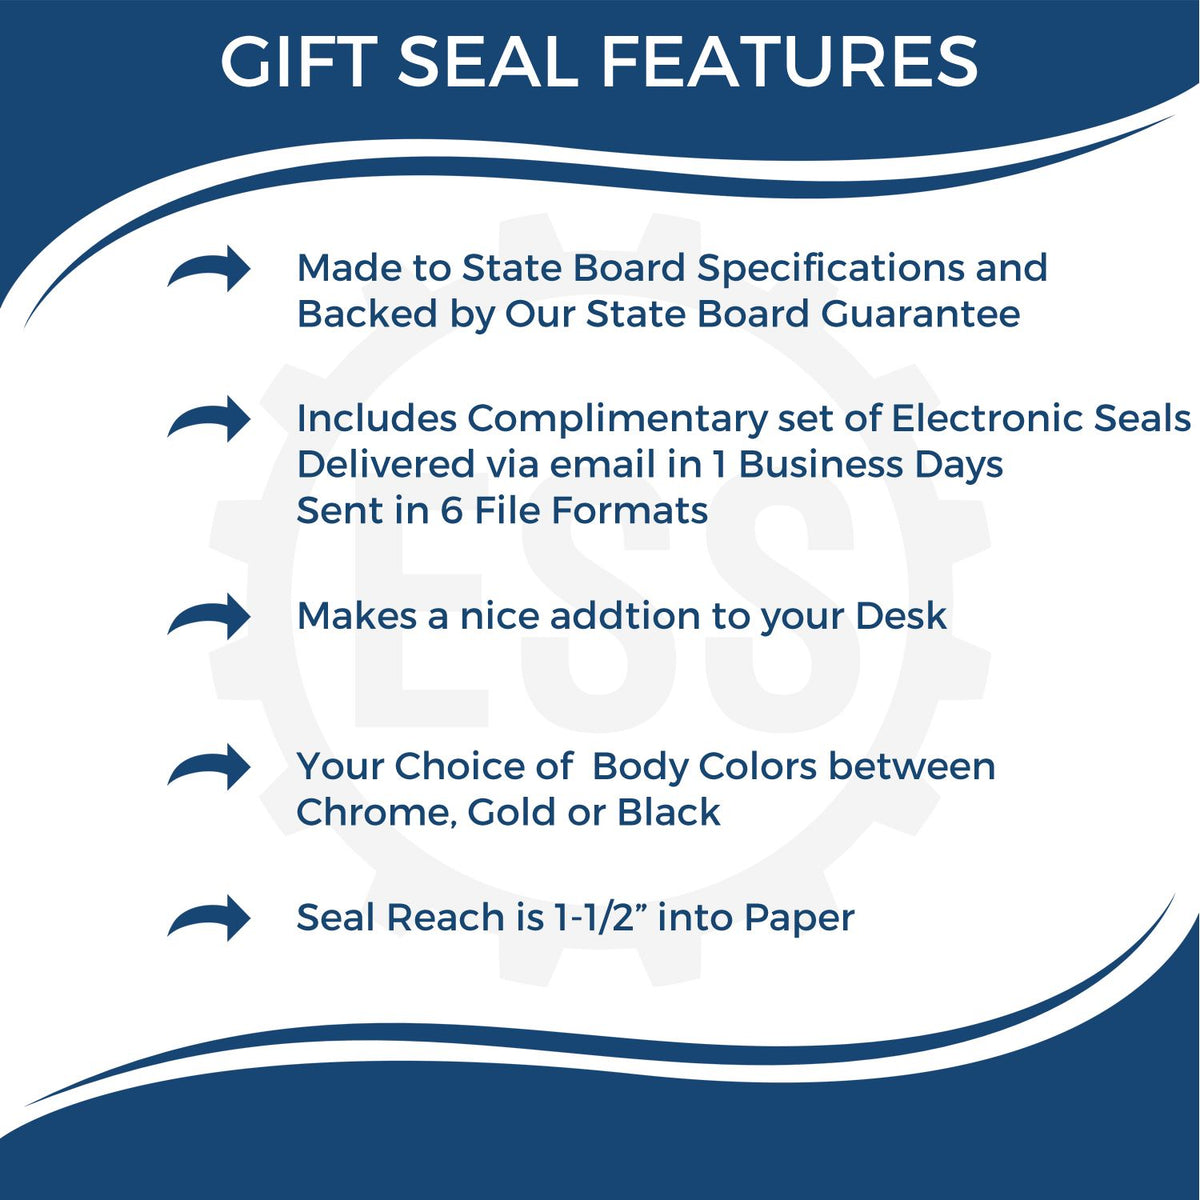 A picture of an infographic highlighting the selling points for the Gift Louisiana Engineer Seal